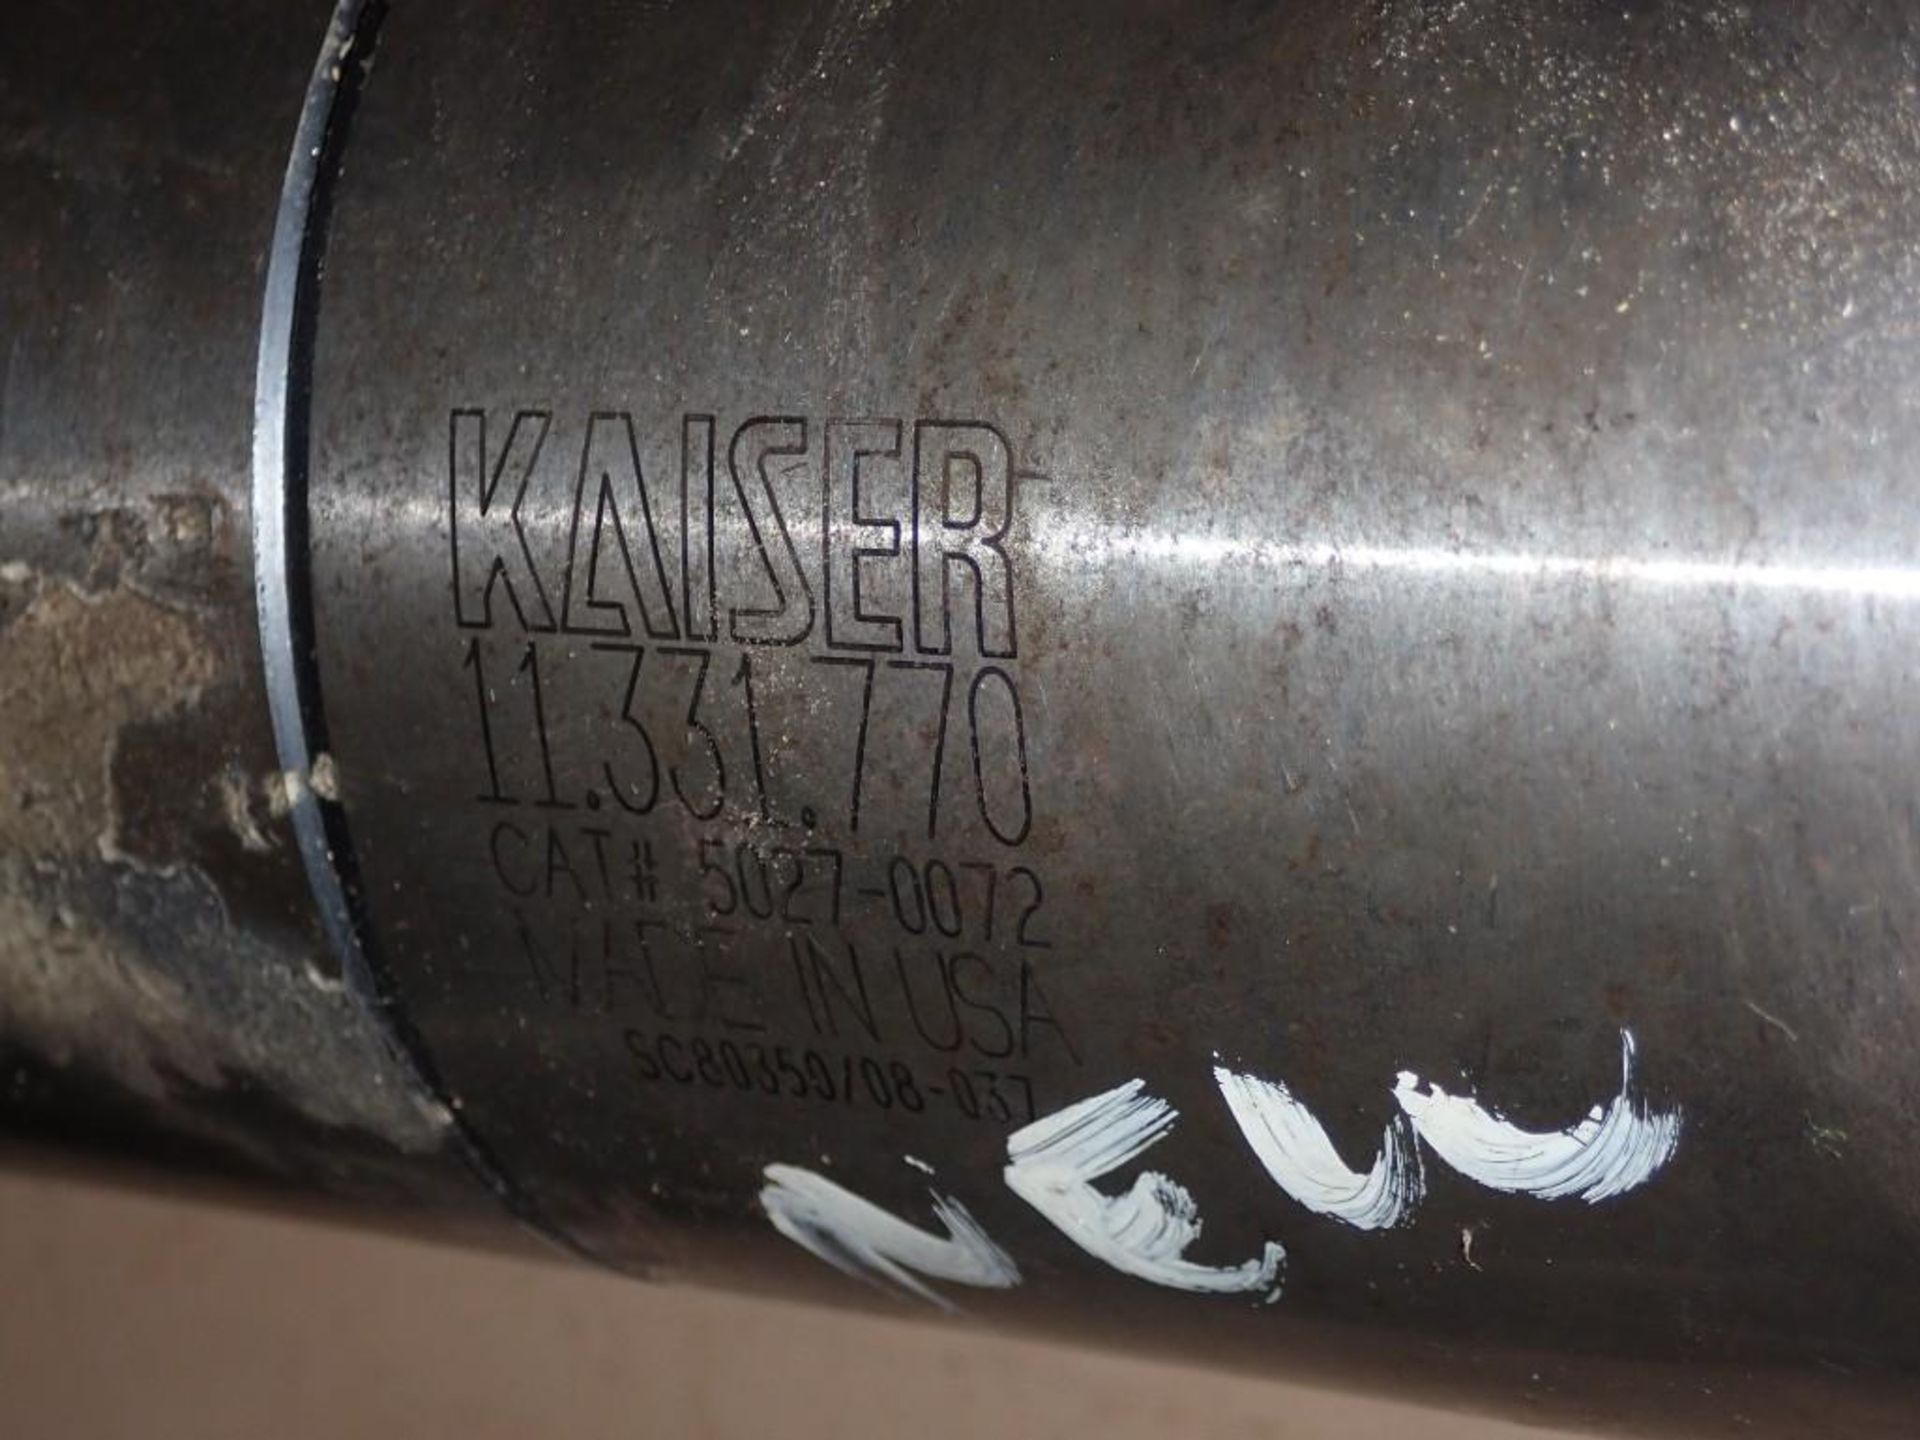 Lot of Kaiser Tooling - Image 8 of 8